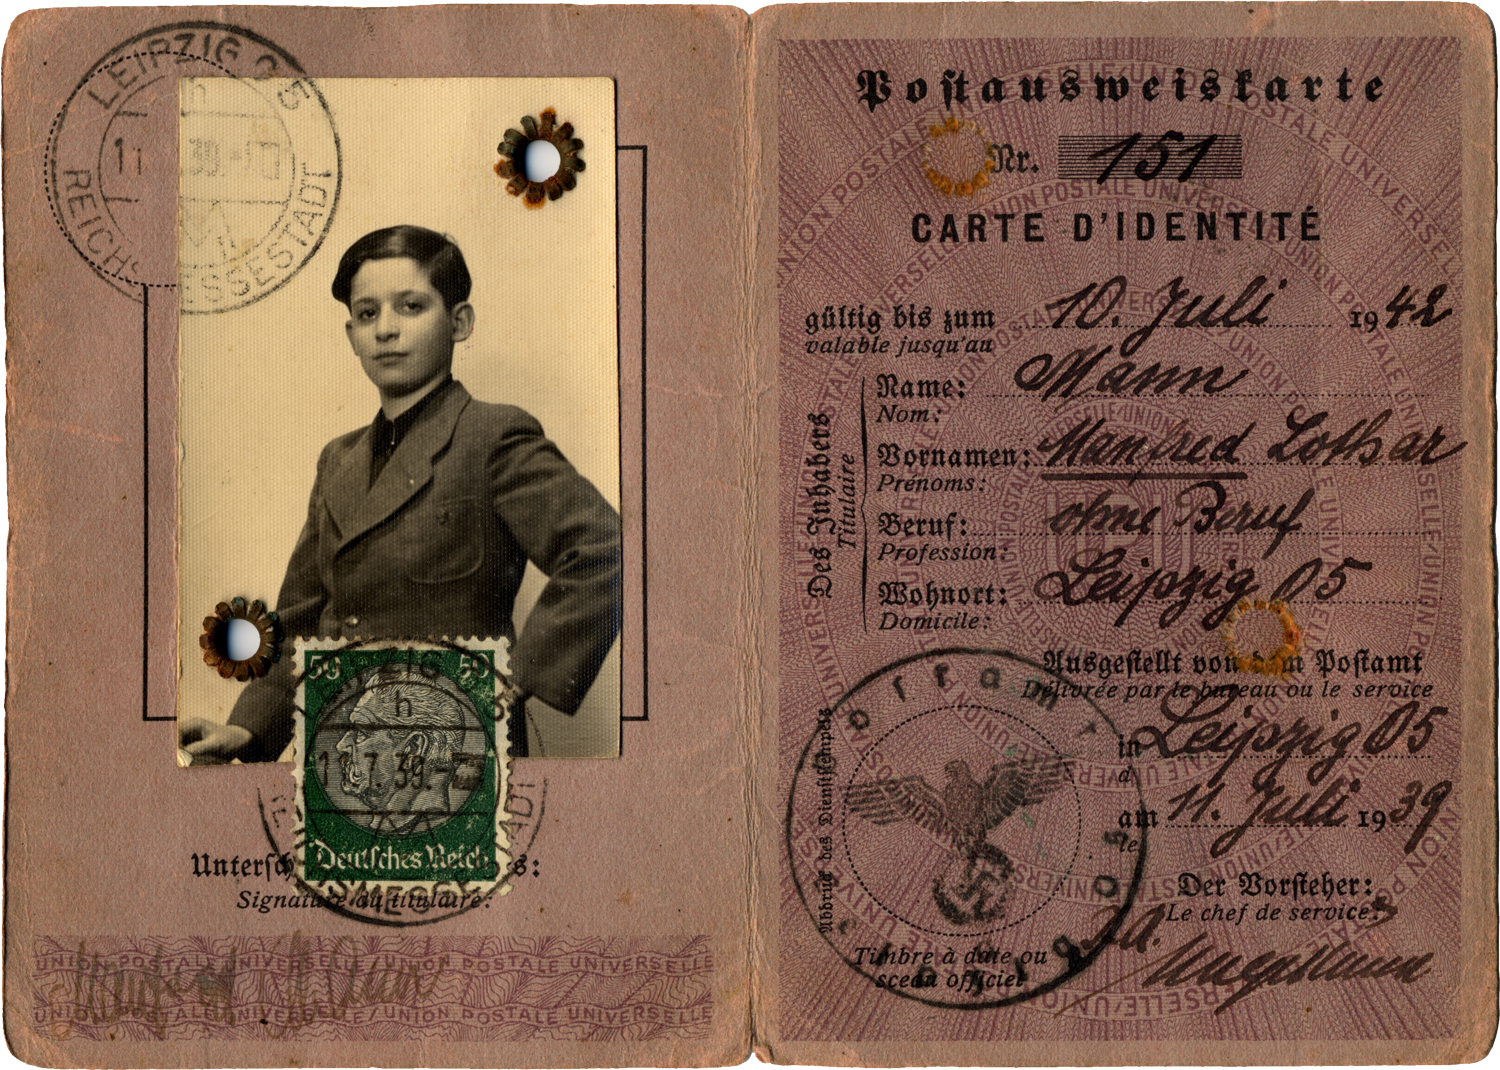 Partial image of old-looking official document with stamps and a partially visible photo of a person in a suit.